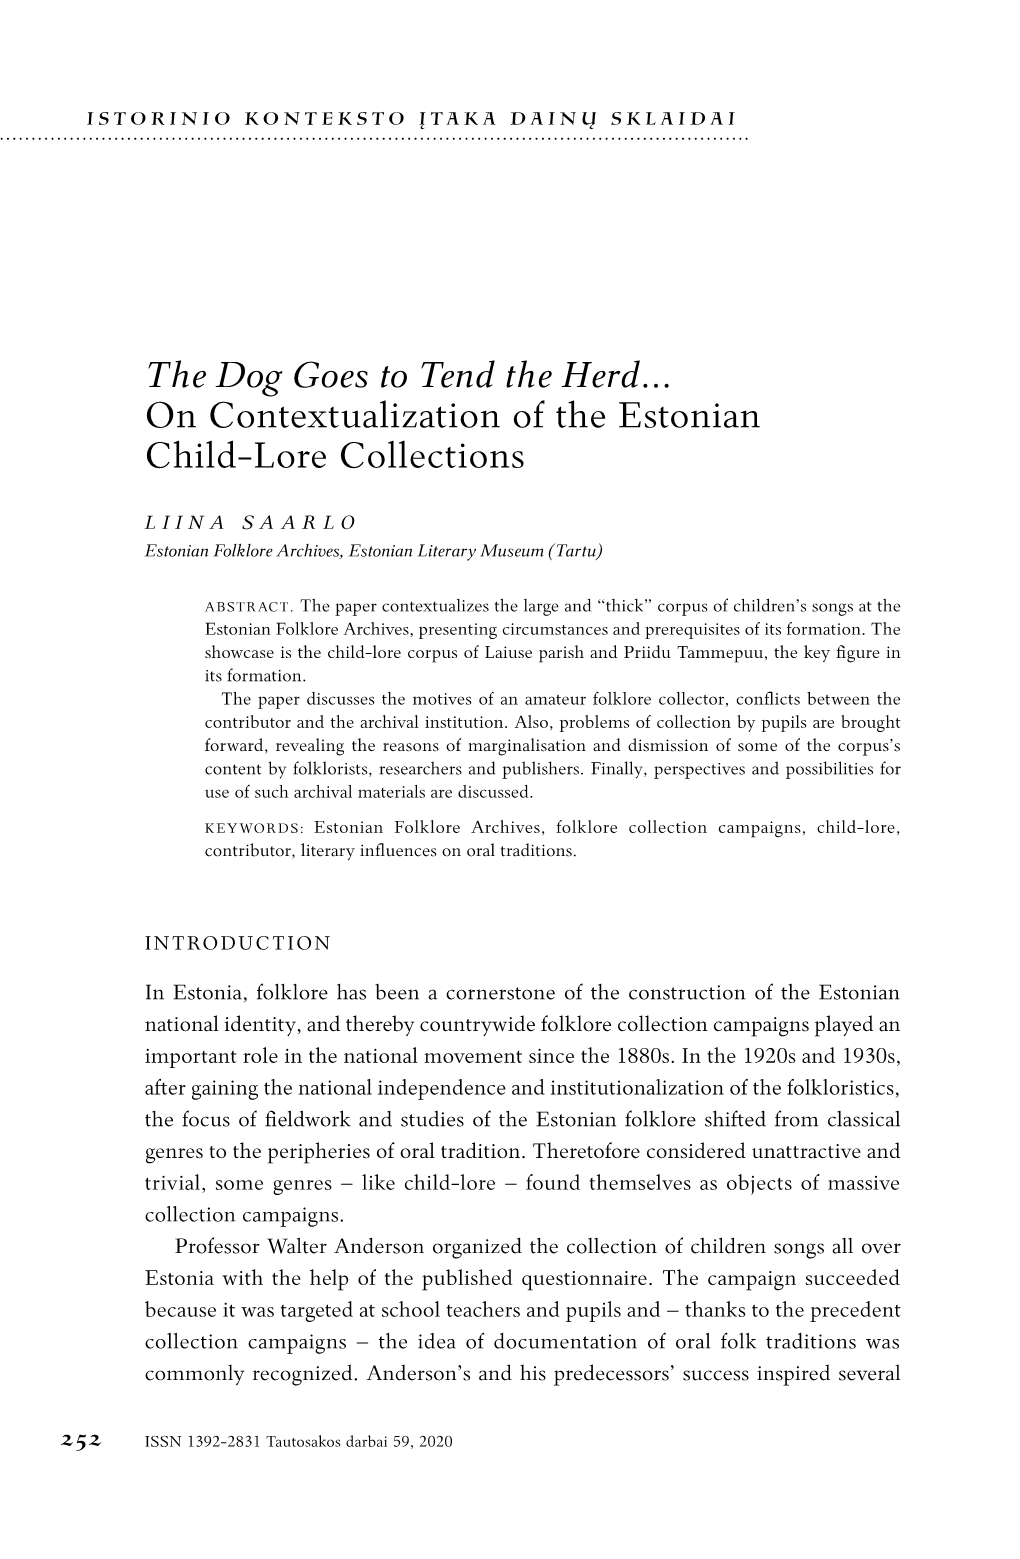 On Contextualization of the Estonian Child-Lore Collections